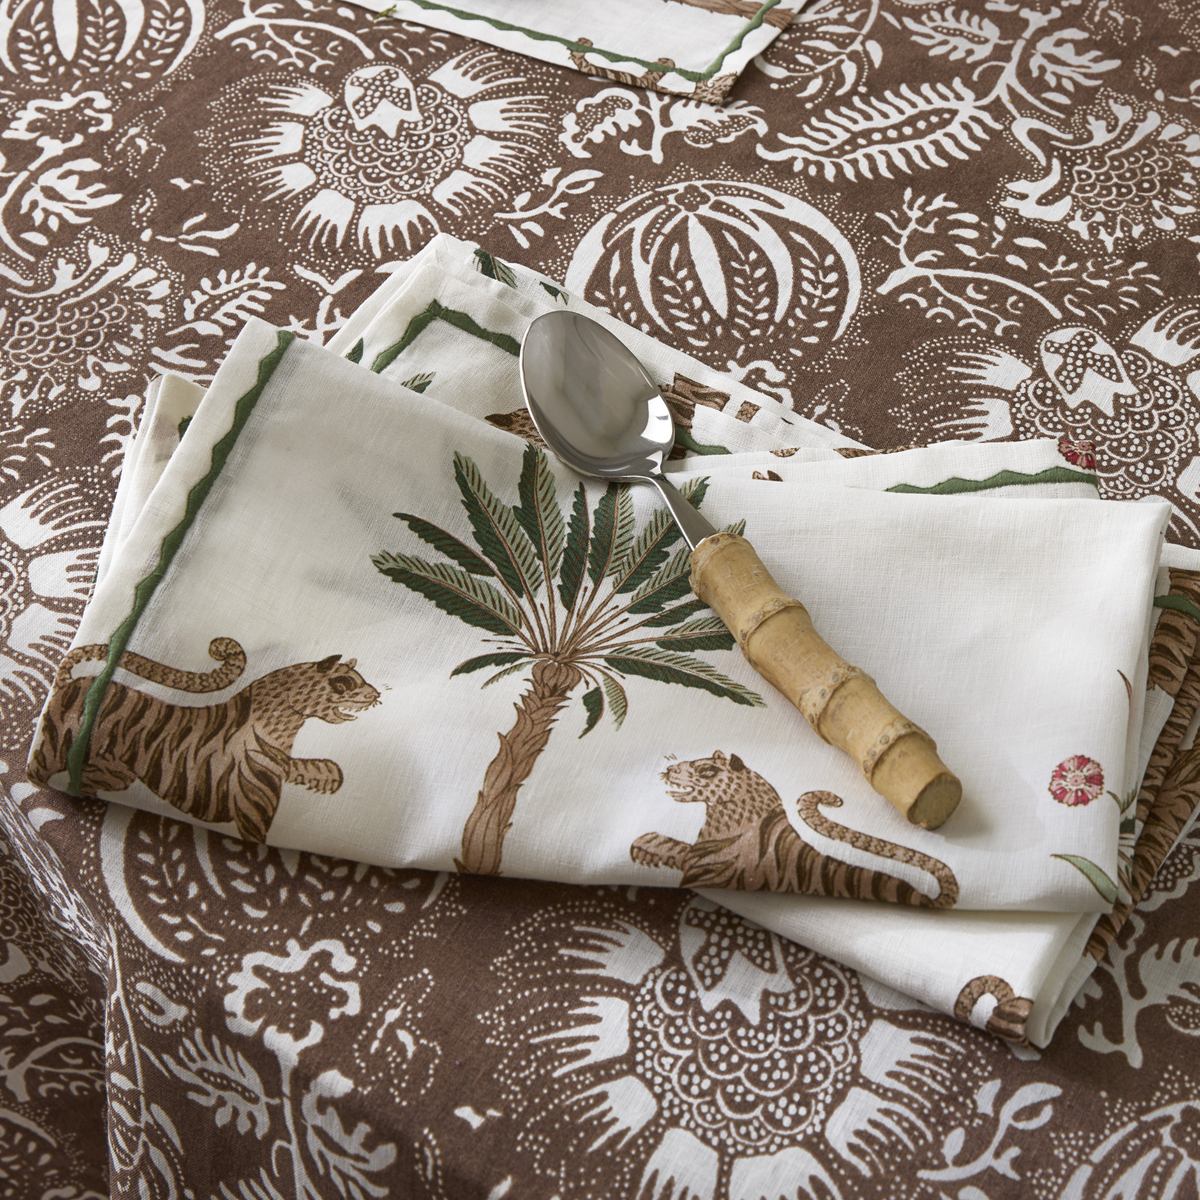 Lifestyle Image of Matouk Tiger Palm Table Linens with Granada Tigereye 